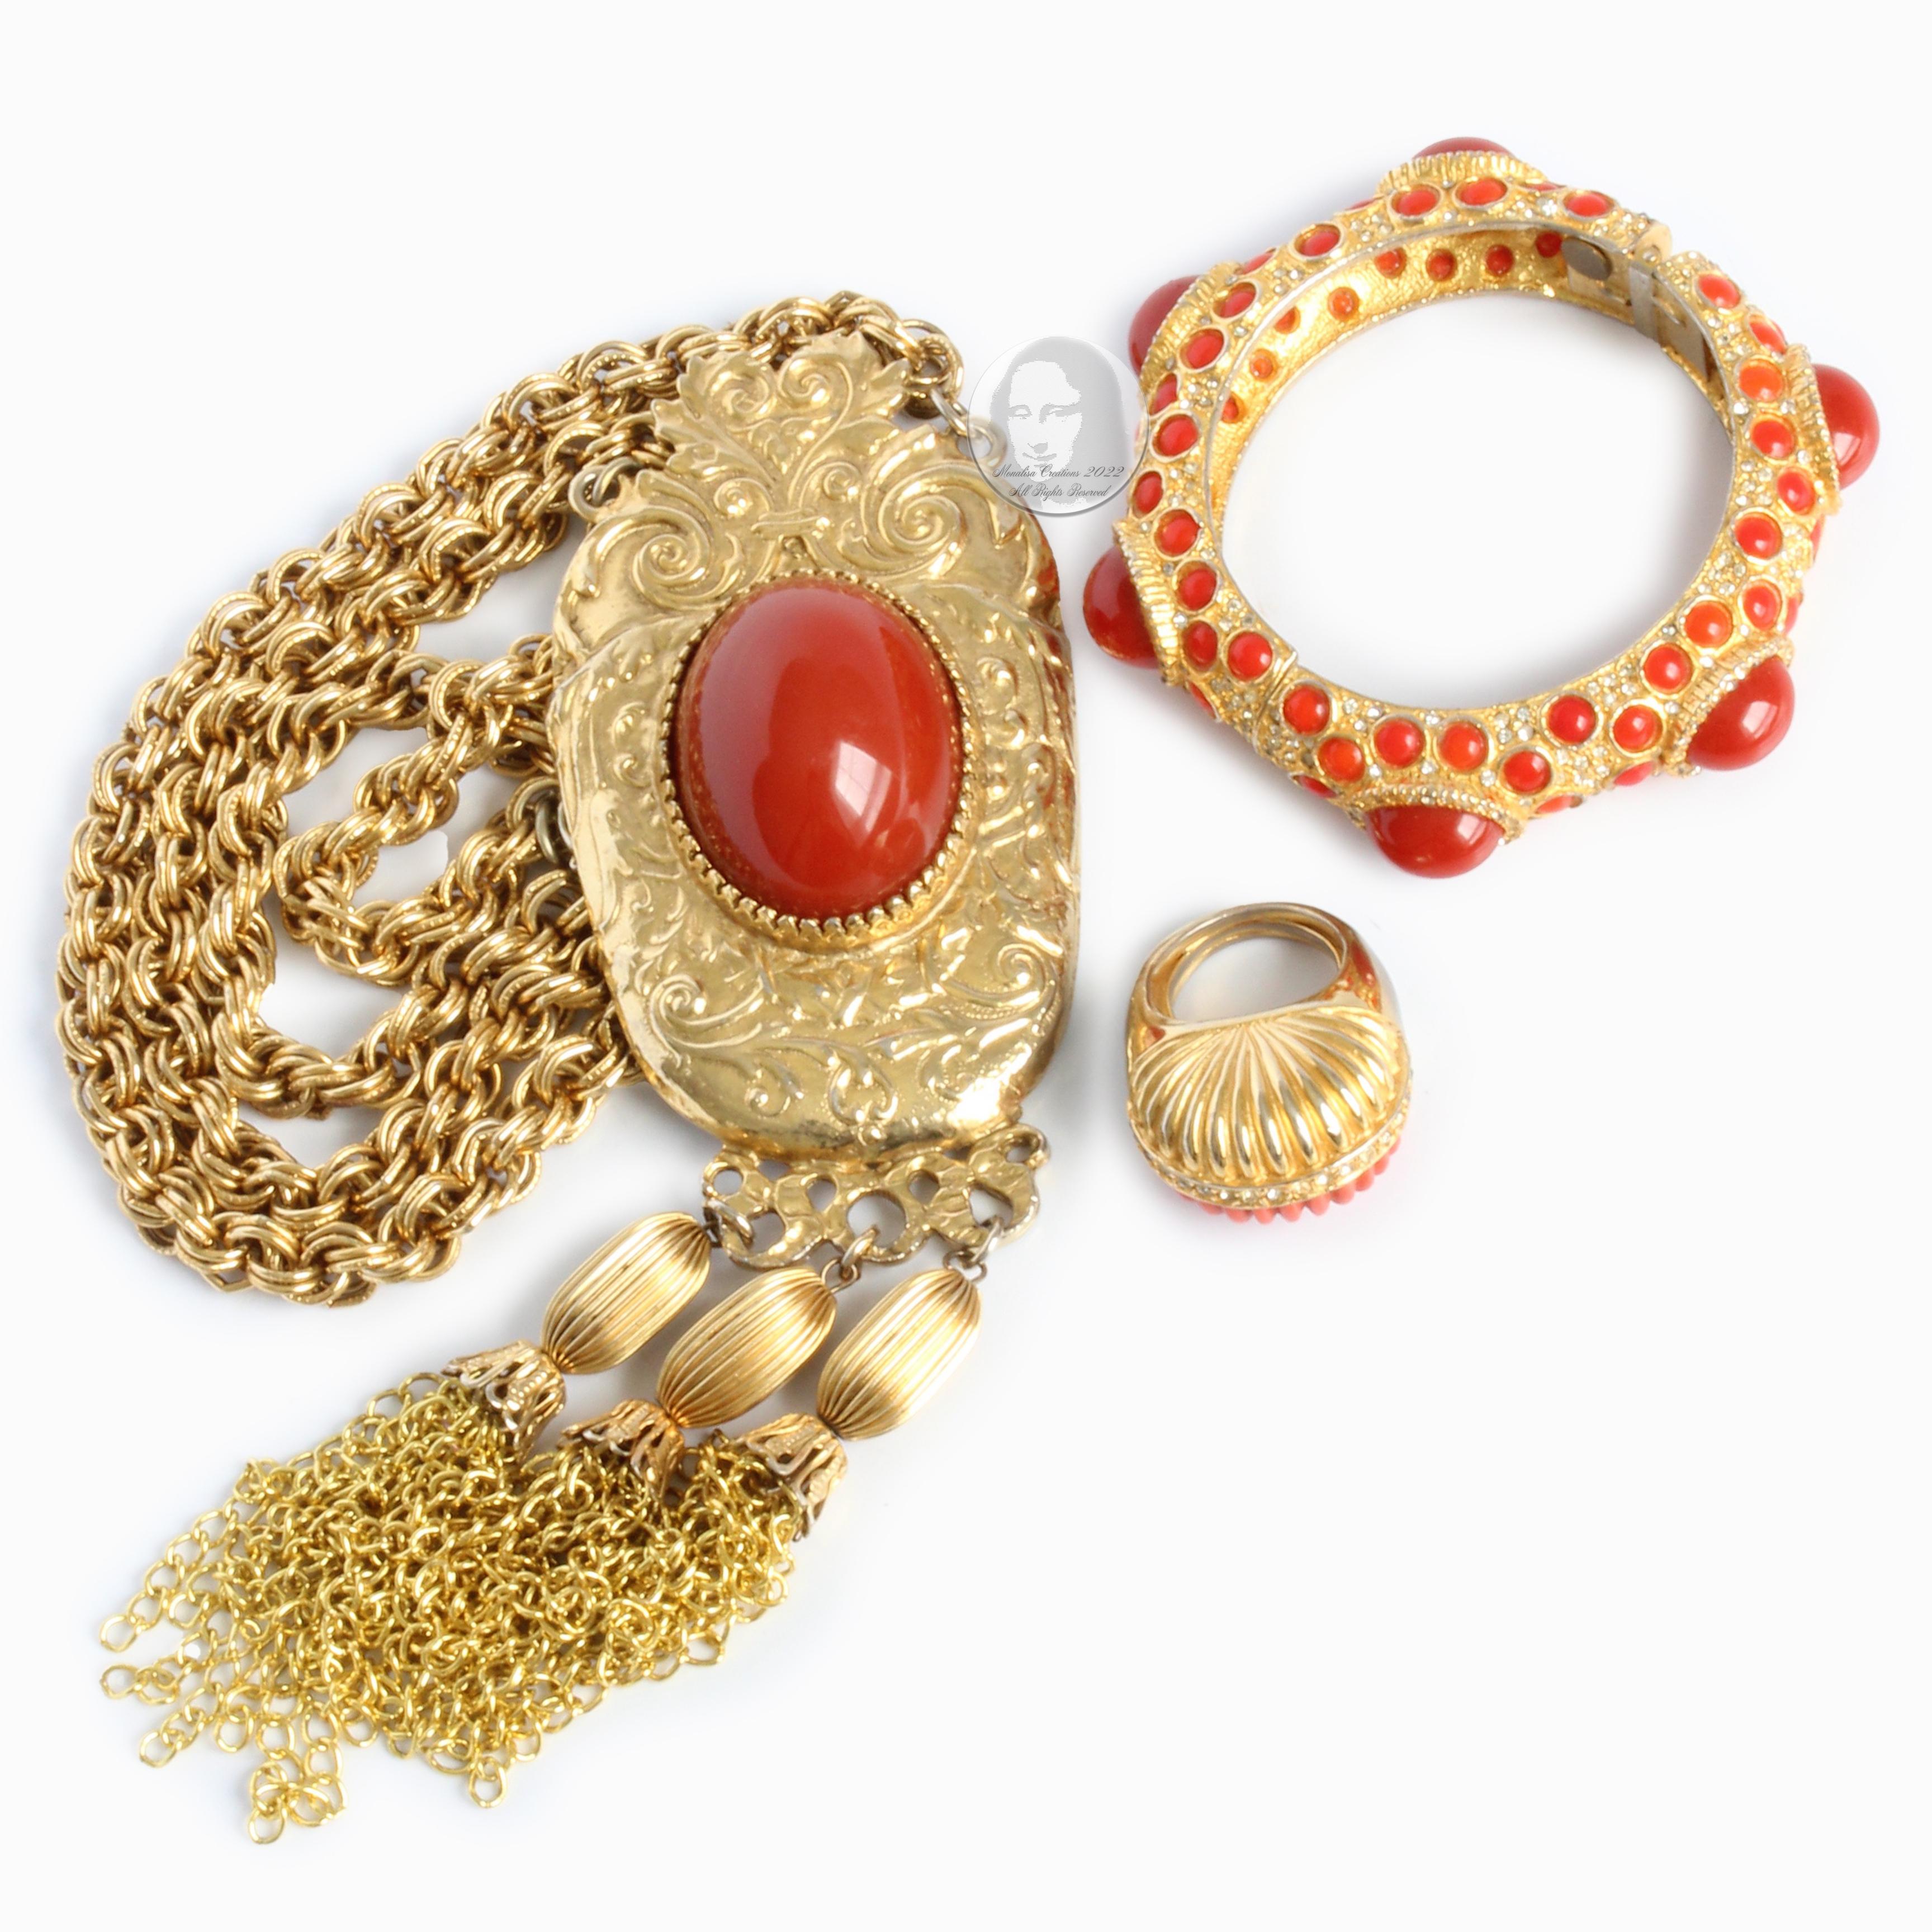 Vintage Pauline Rader 3pc jewelry set: oversized Carnelian & Gold Metal Pendant necklace with gold chain fringe, rhinestone & Carnelian stone clamper bracelet and oversized Carnelian and gold metal cocktail ring. A rare and opulent set!  Pendant